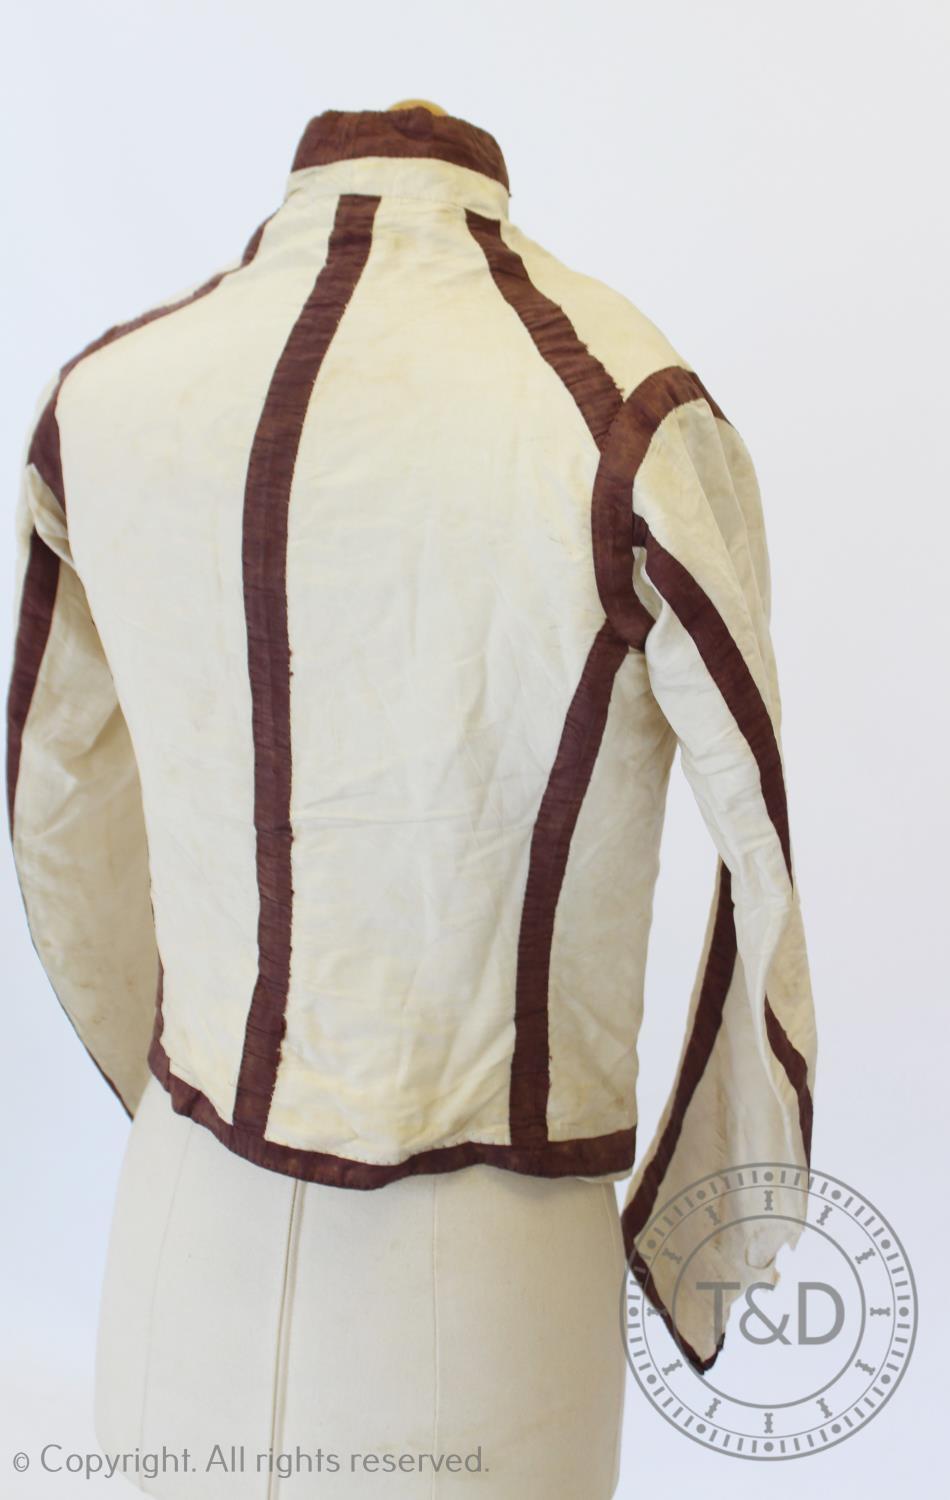 An ivory silk taffeta sleeved waistcoat or jacket, circa 1810, boldly banded and edged in dark plum, - Image 4 of 5